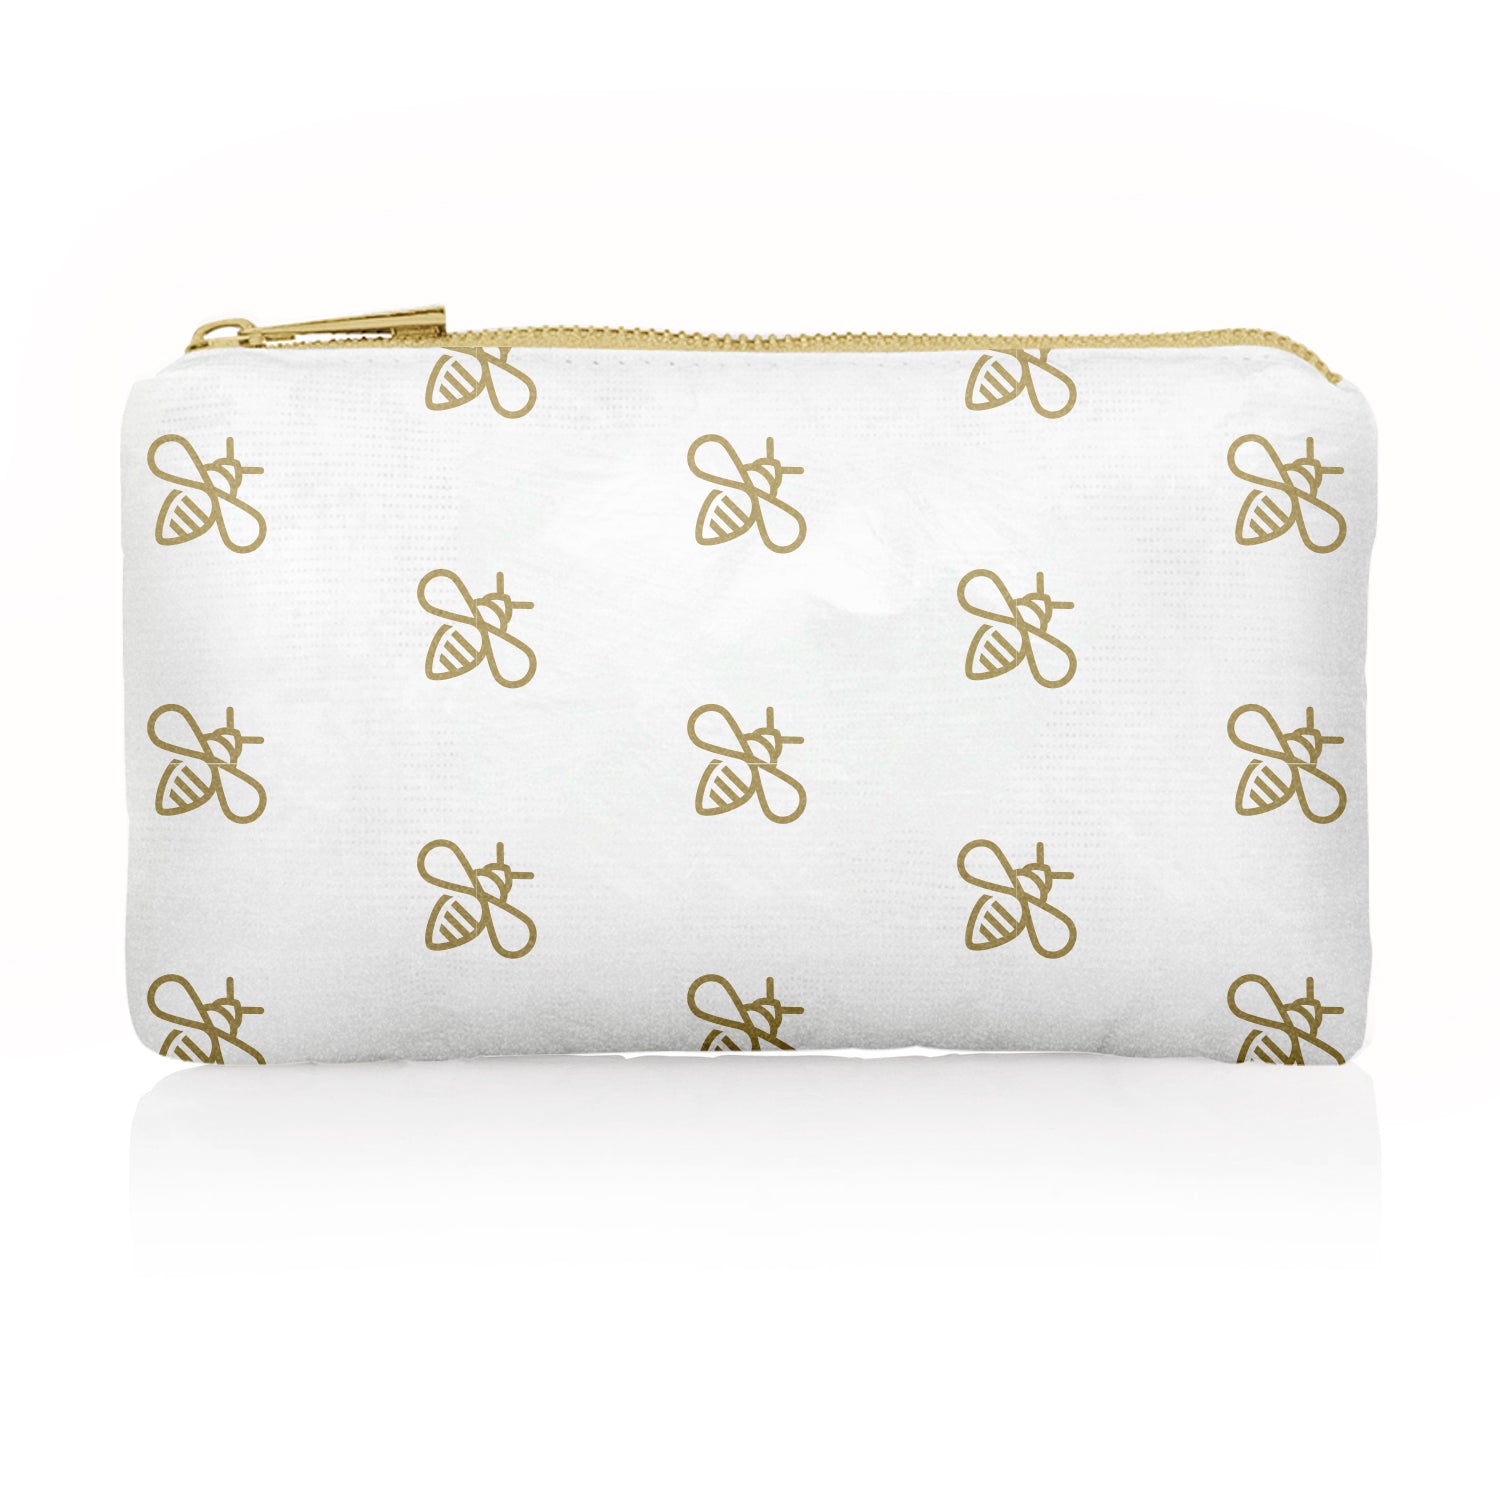 Mini Zipper Pack in Shimmer White with Gold "Busy Bees"